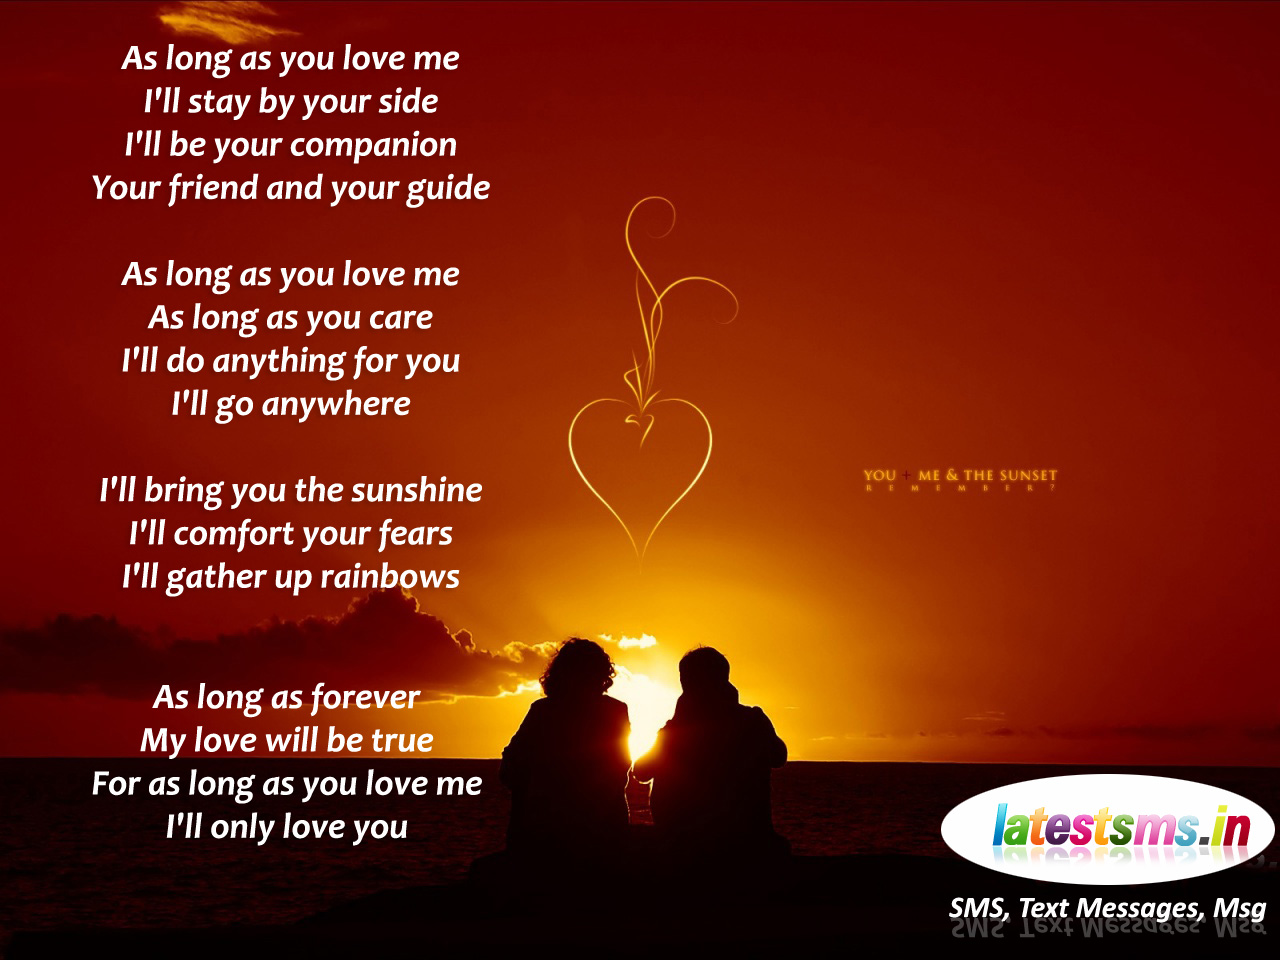 Readmore here Valentines Day 2013 Sayings and Quotes